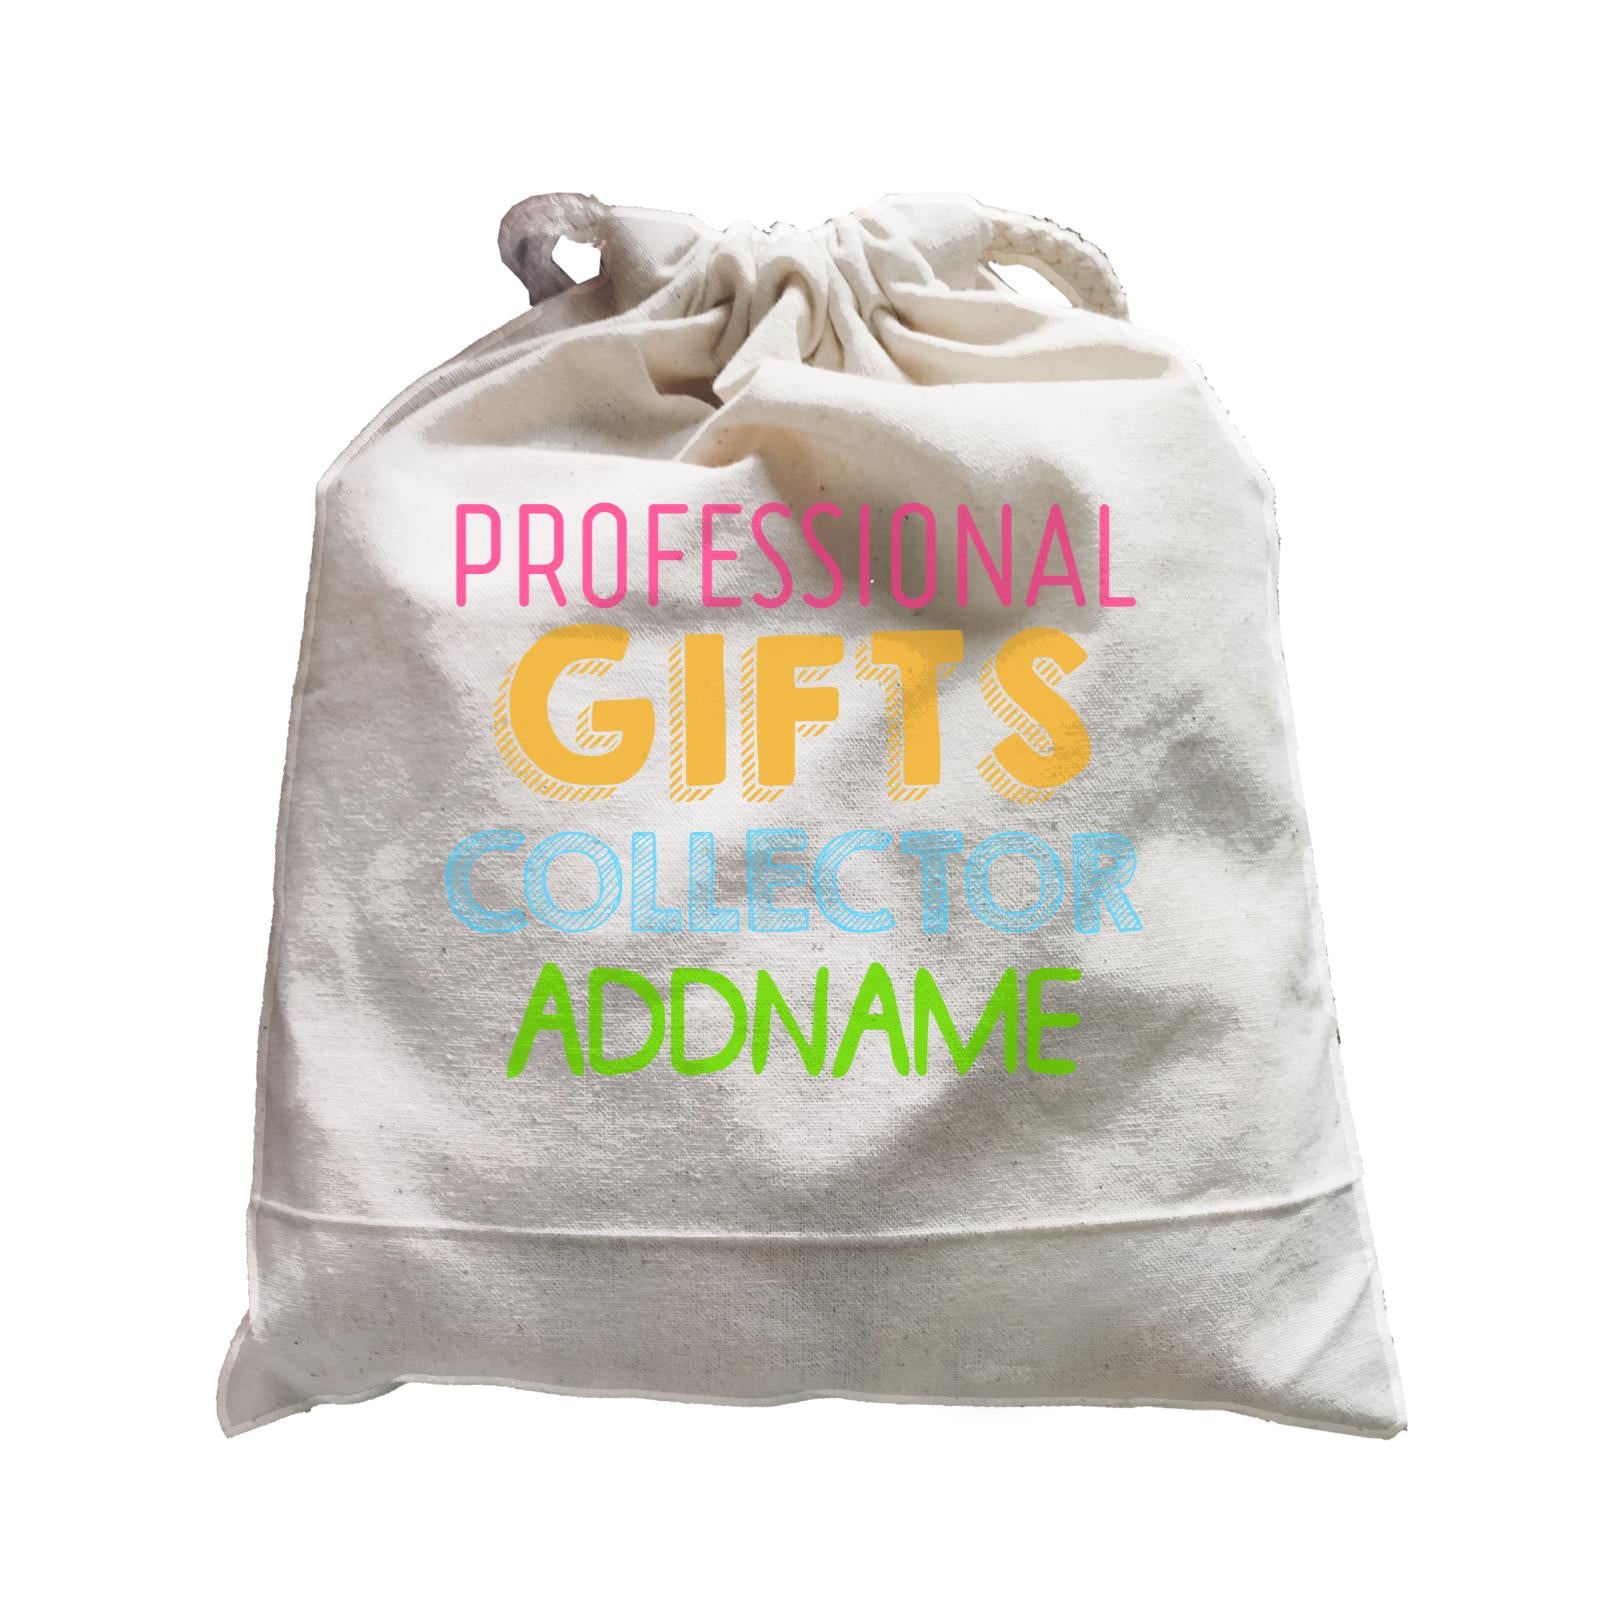 Professional Gifts Collector Addname Satchel